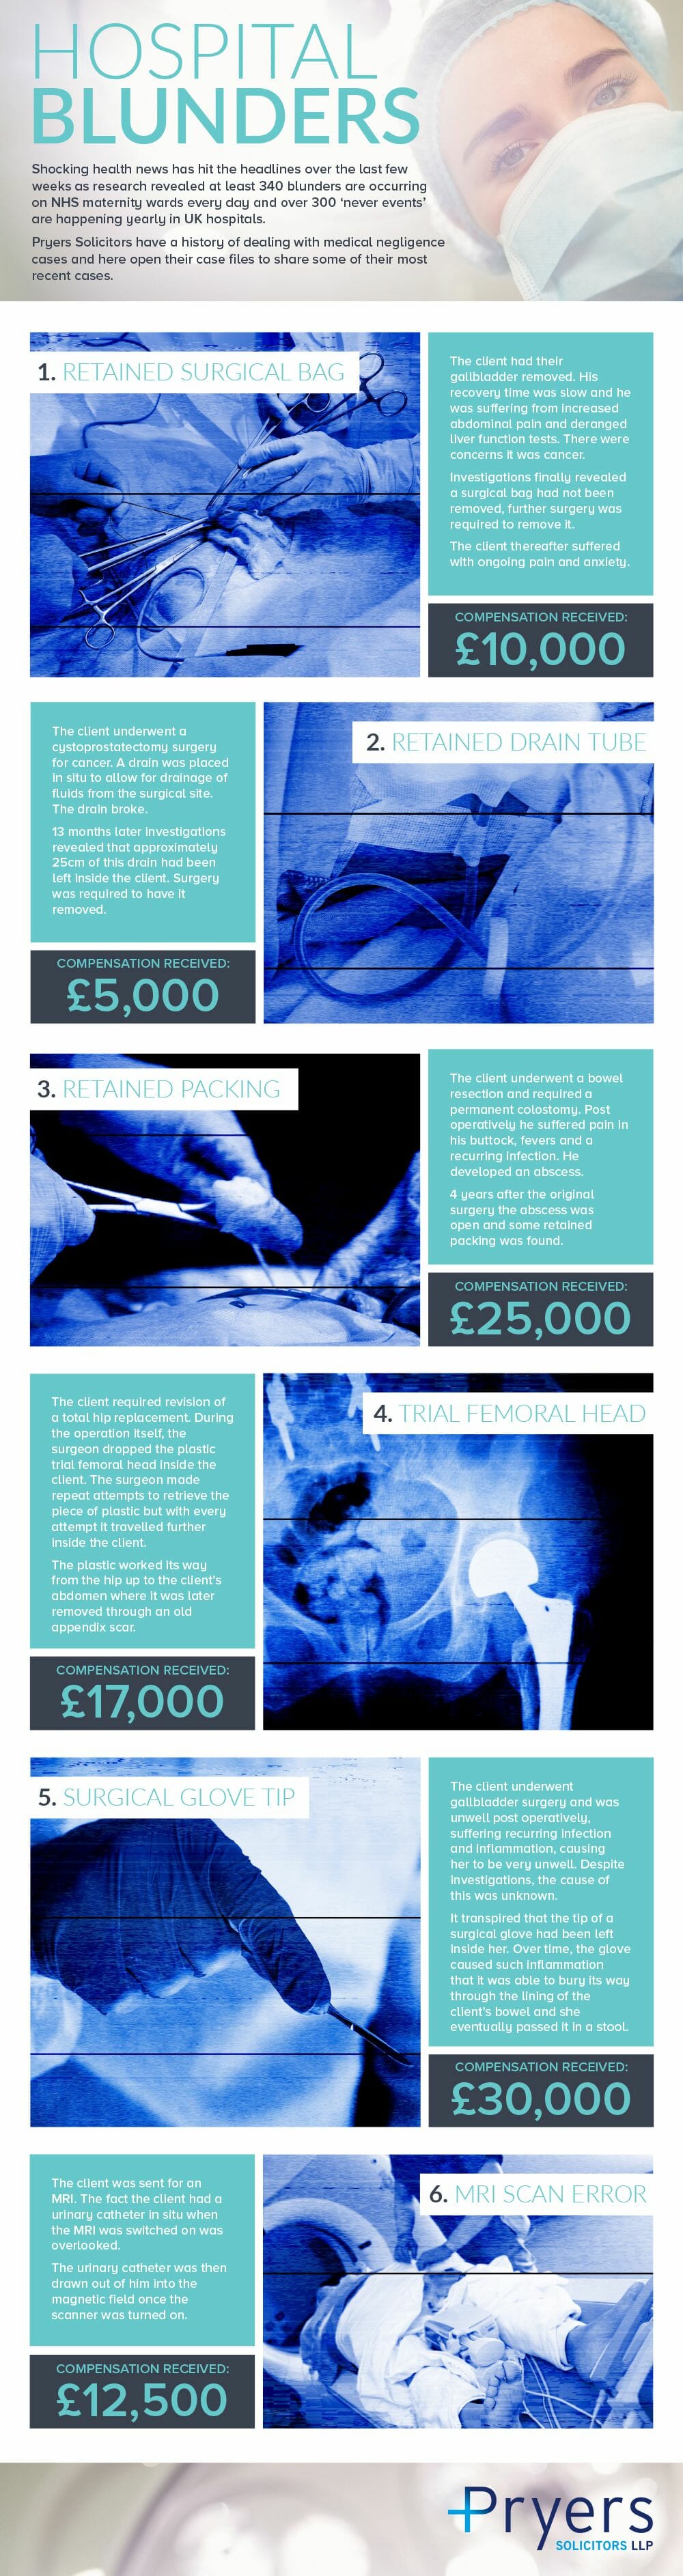 Medical Negligence Infographic